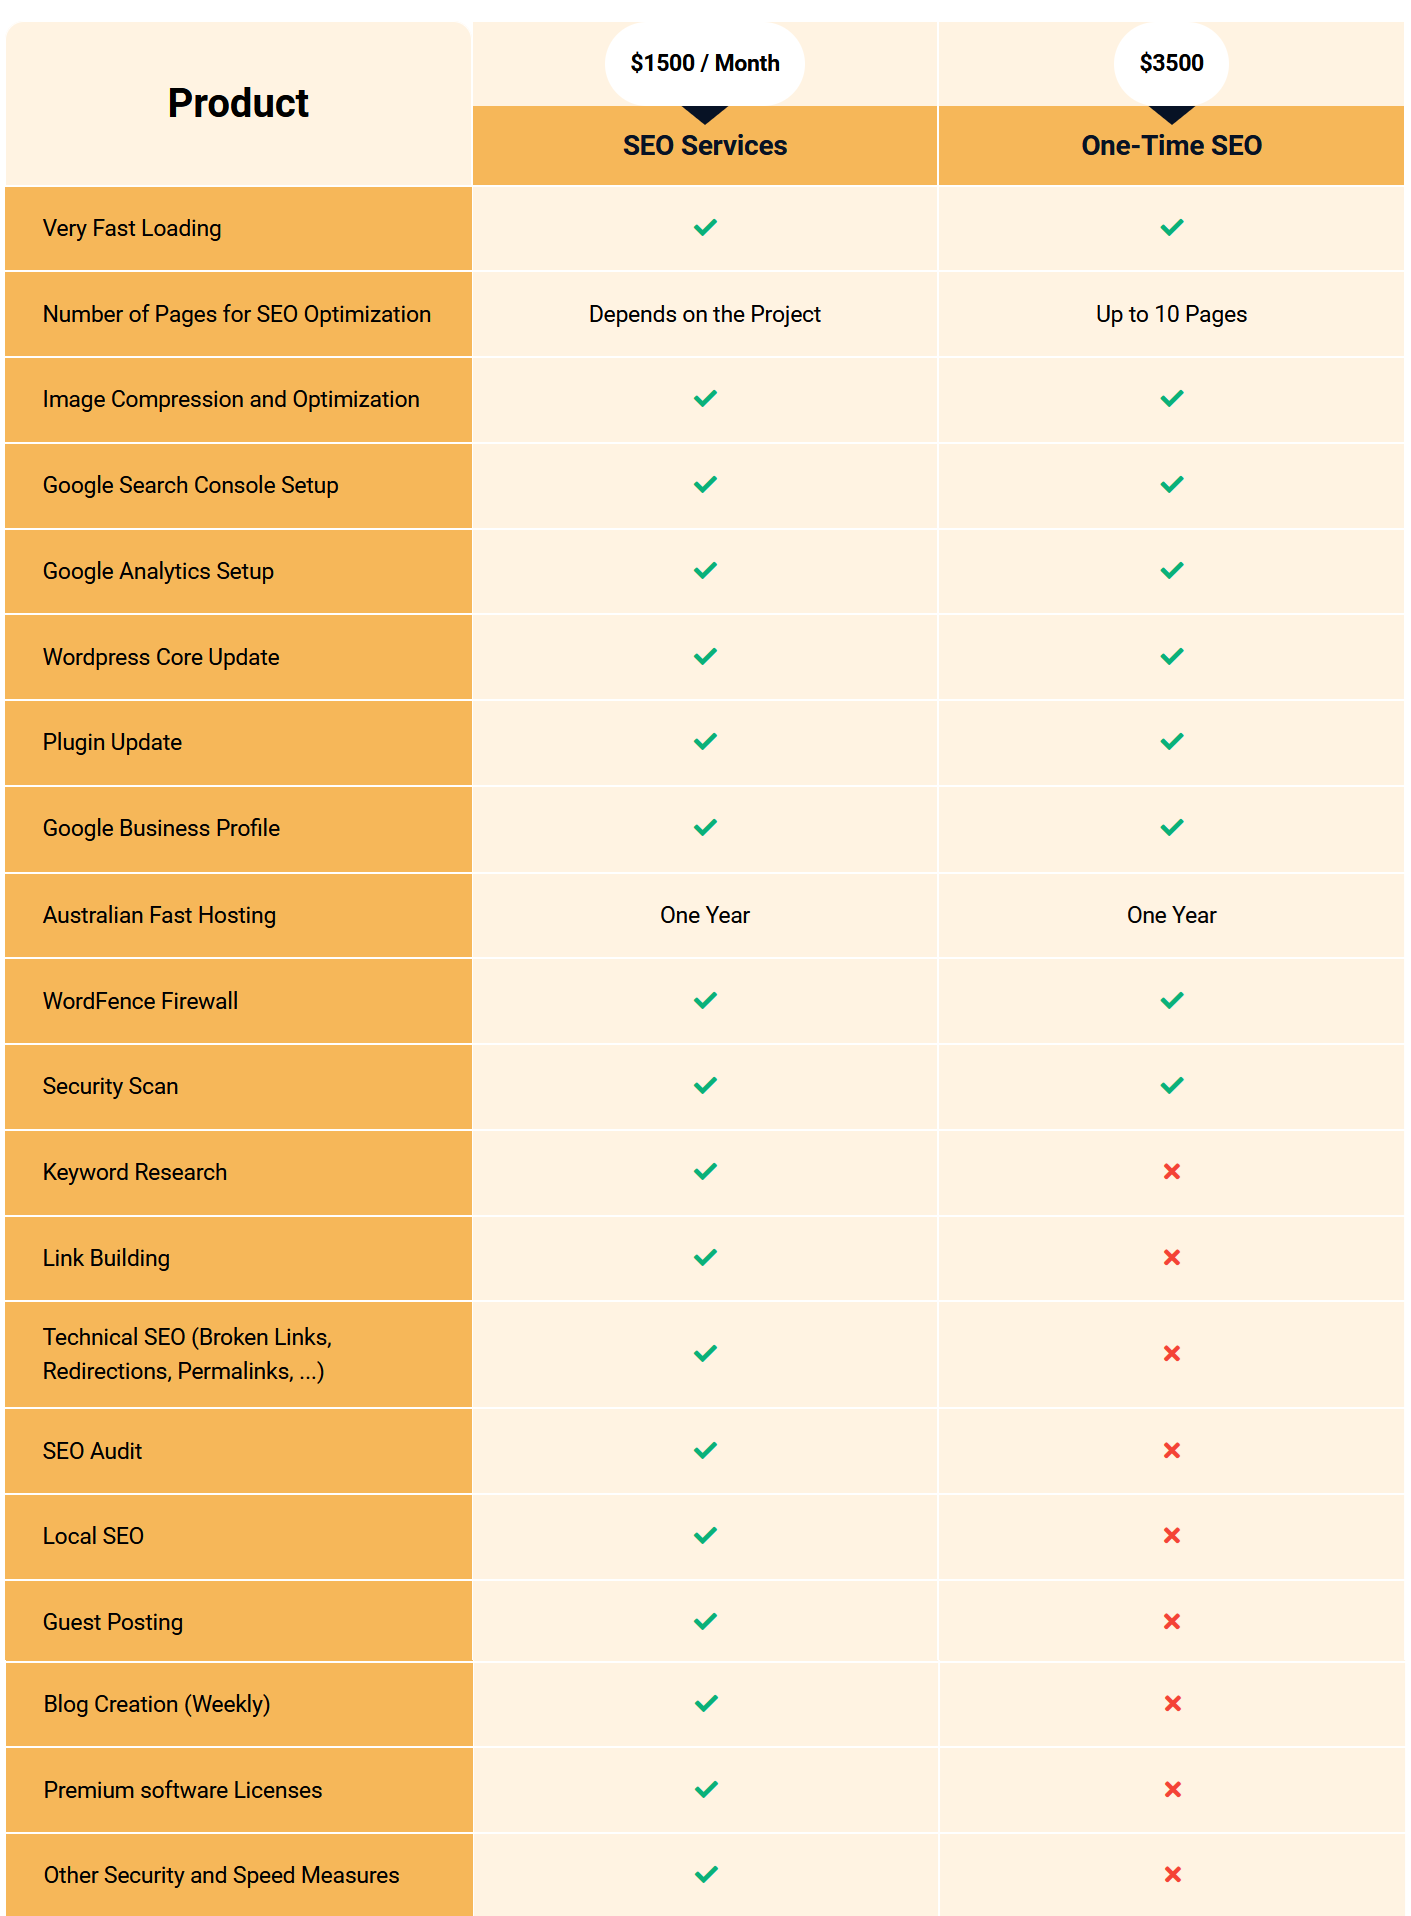 SEO services pricing comparison table. Full services with monthly fee of $1500, and limited one time services with price of $3500 once.